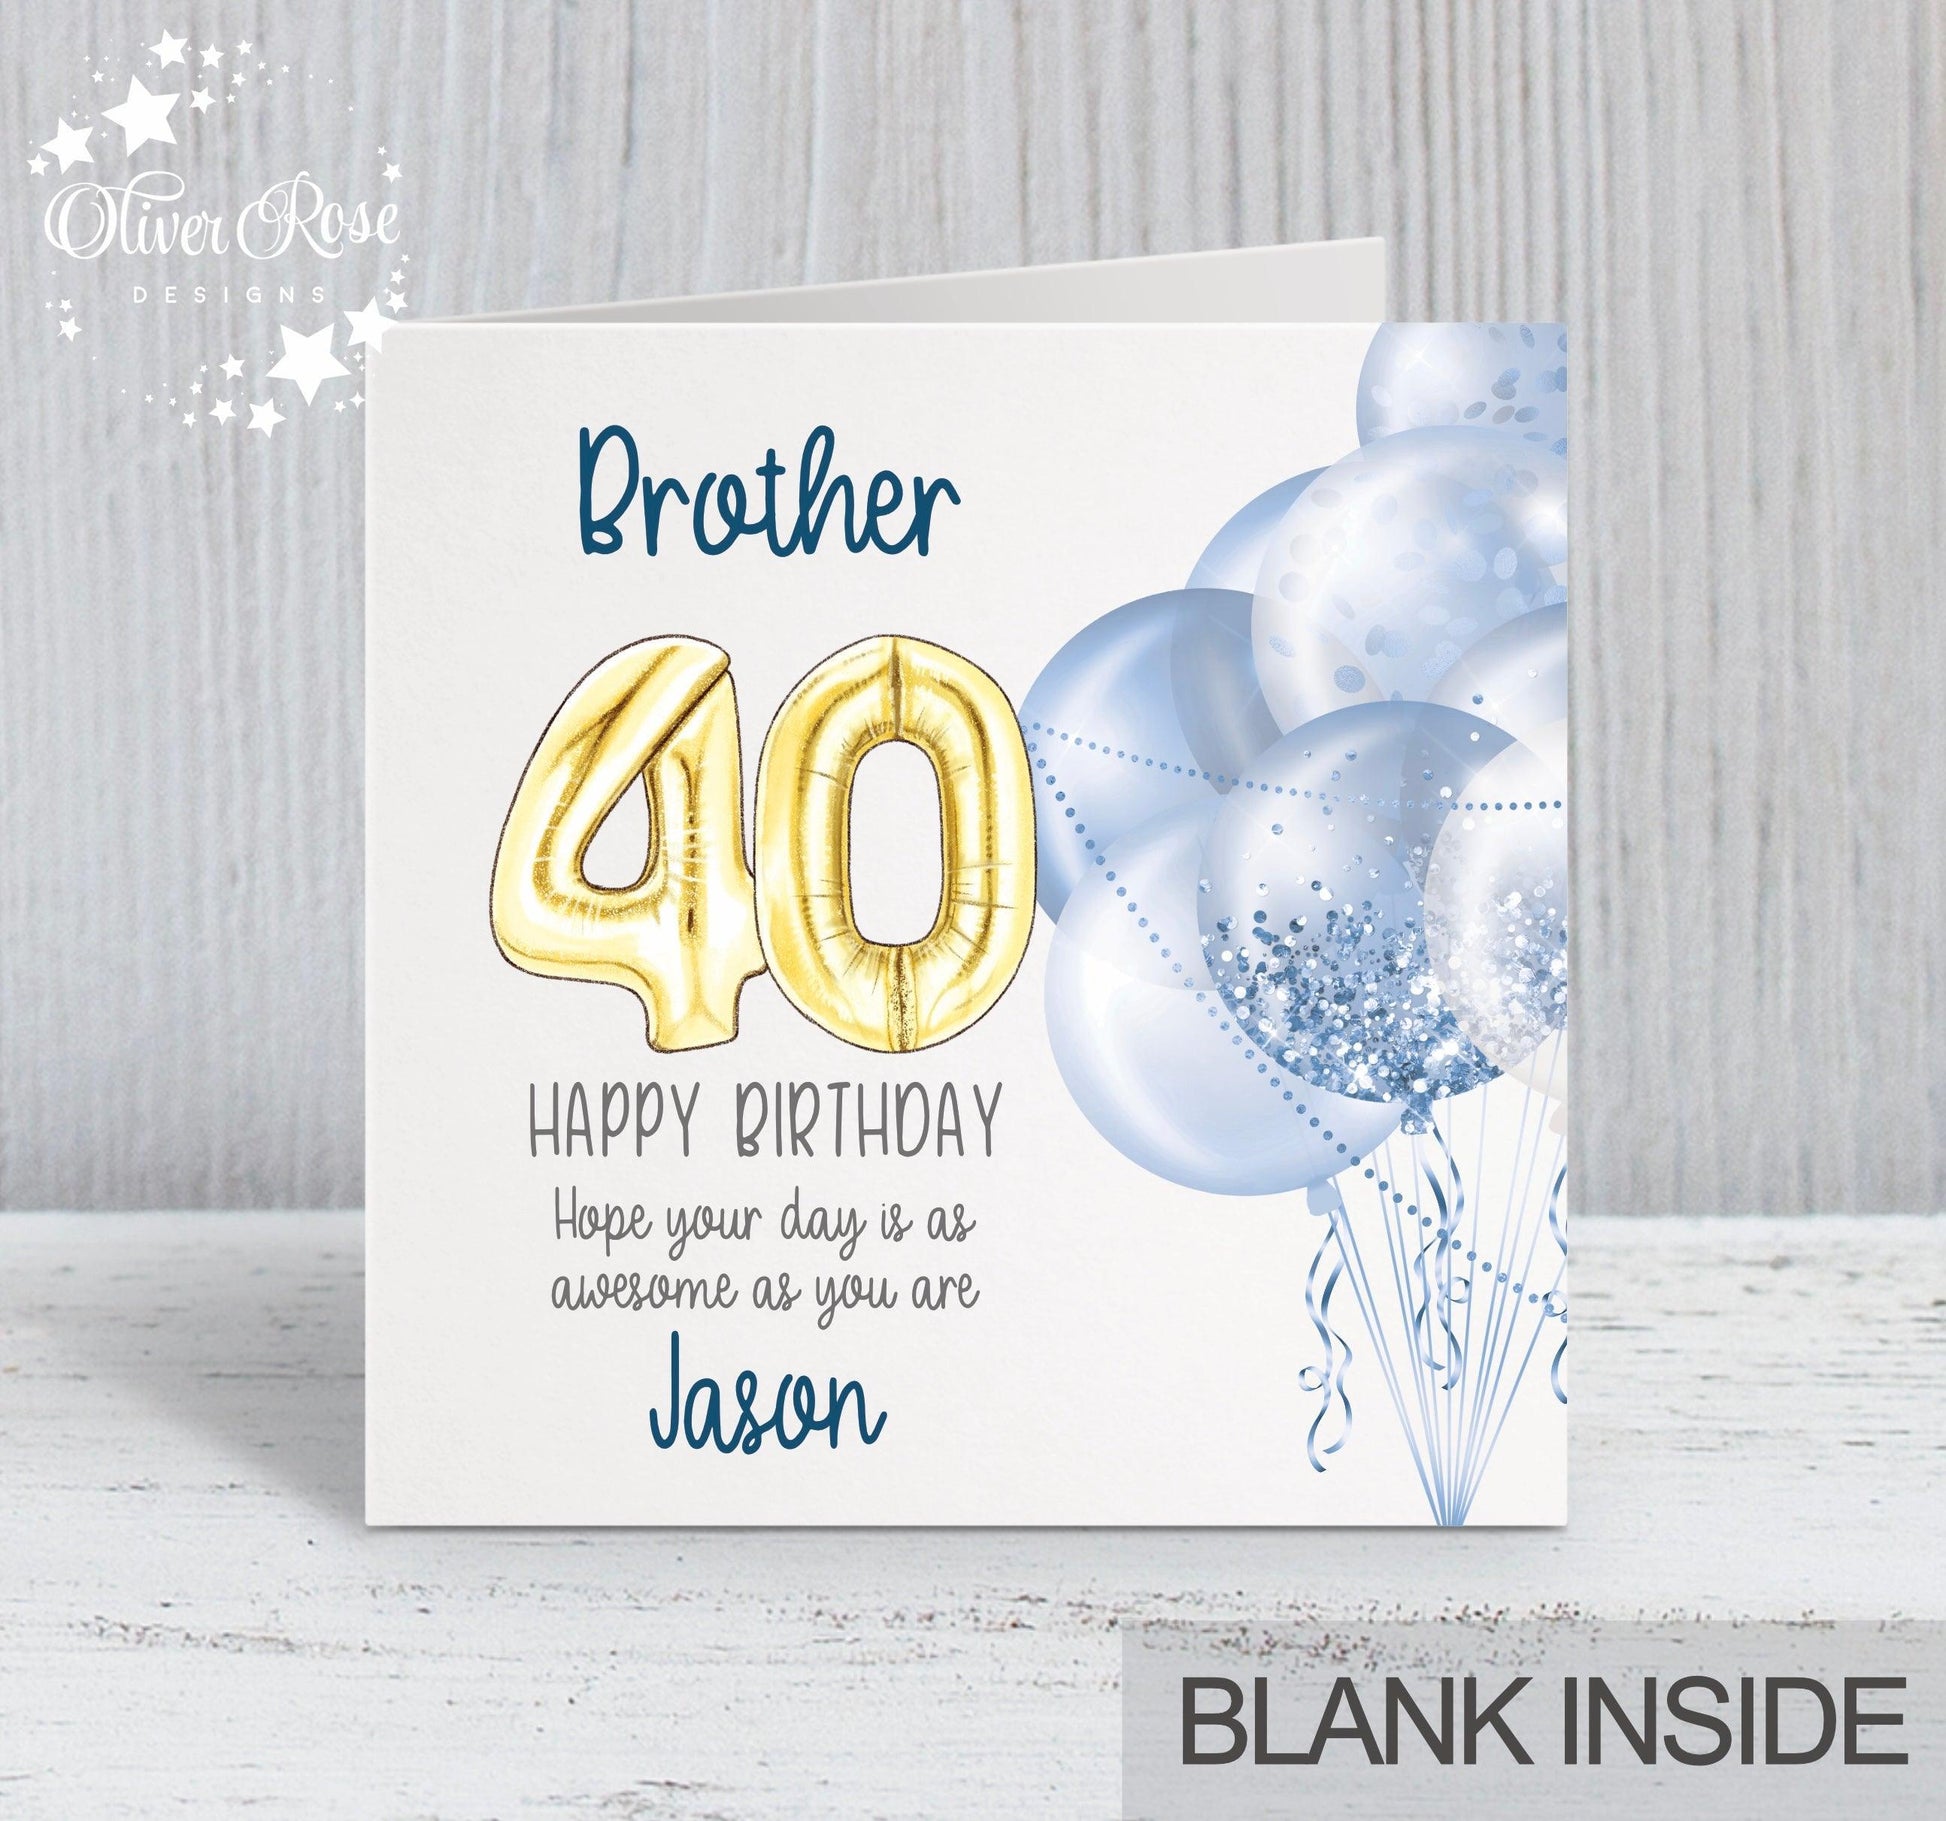 40th Birthday Card Brother, Blue & Gold Balloons, Personalised with name, Happy Birthday, Hope your day is as awesome as you are! 5.75" square Blank Inside